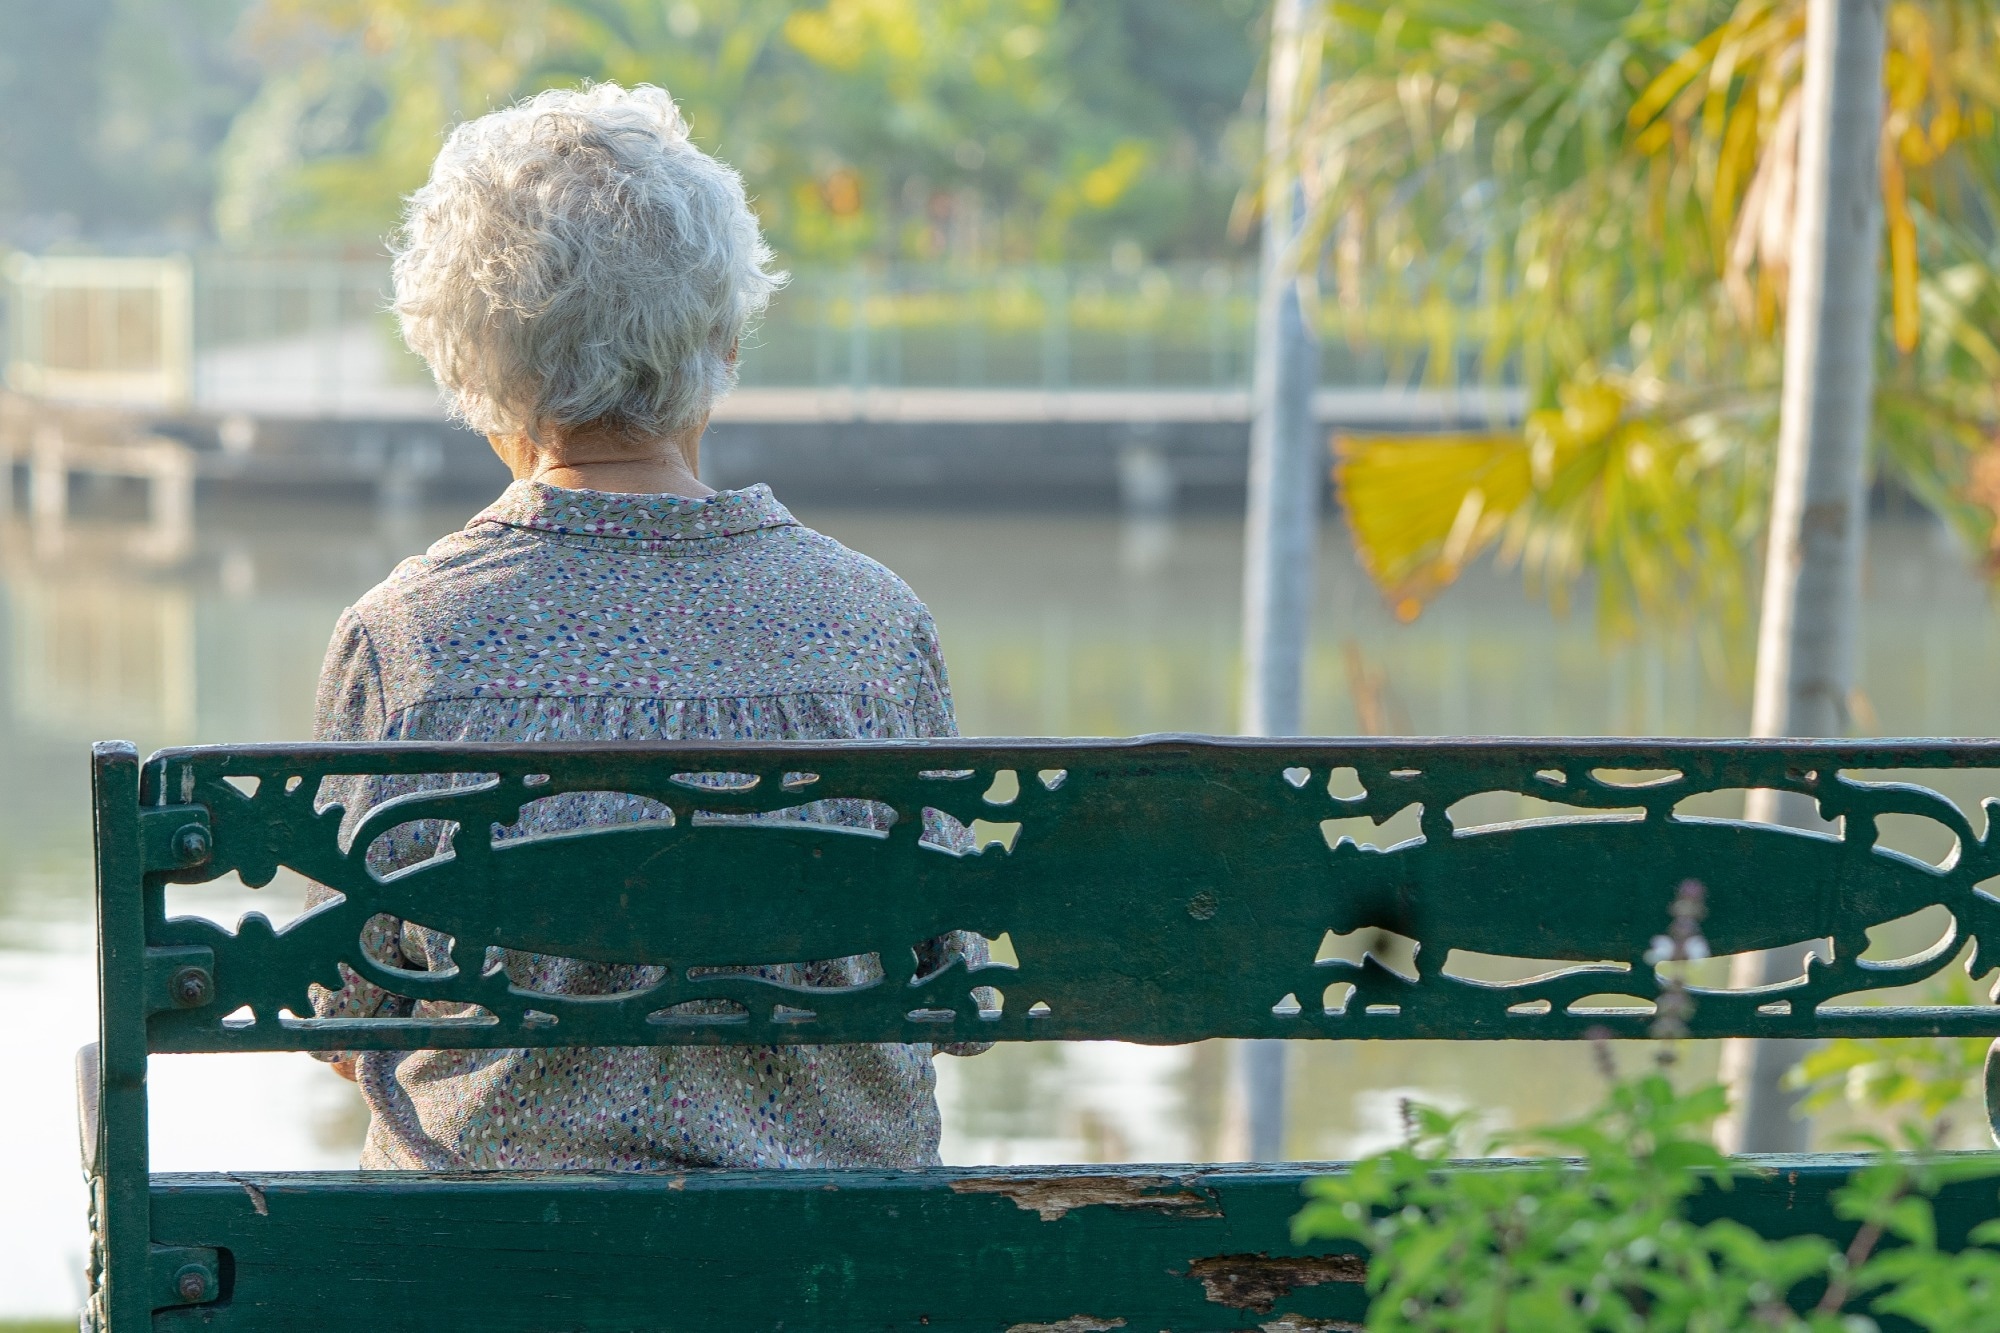 Study: Association of cumulative loneliness with all-cause mortality among middle-aged and older adults in the United States, 1996 to 2019. Image Credit: sasirin pamai / Shutterstock